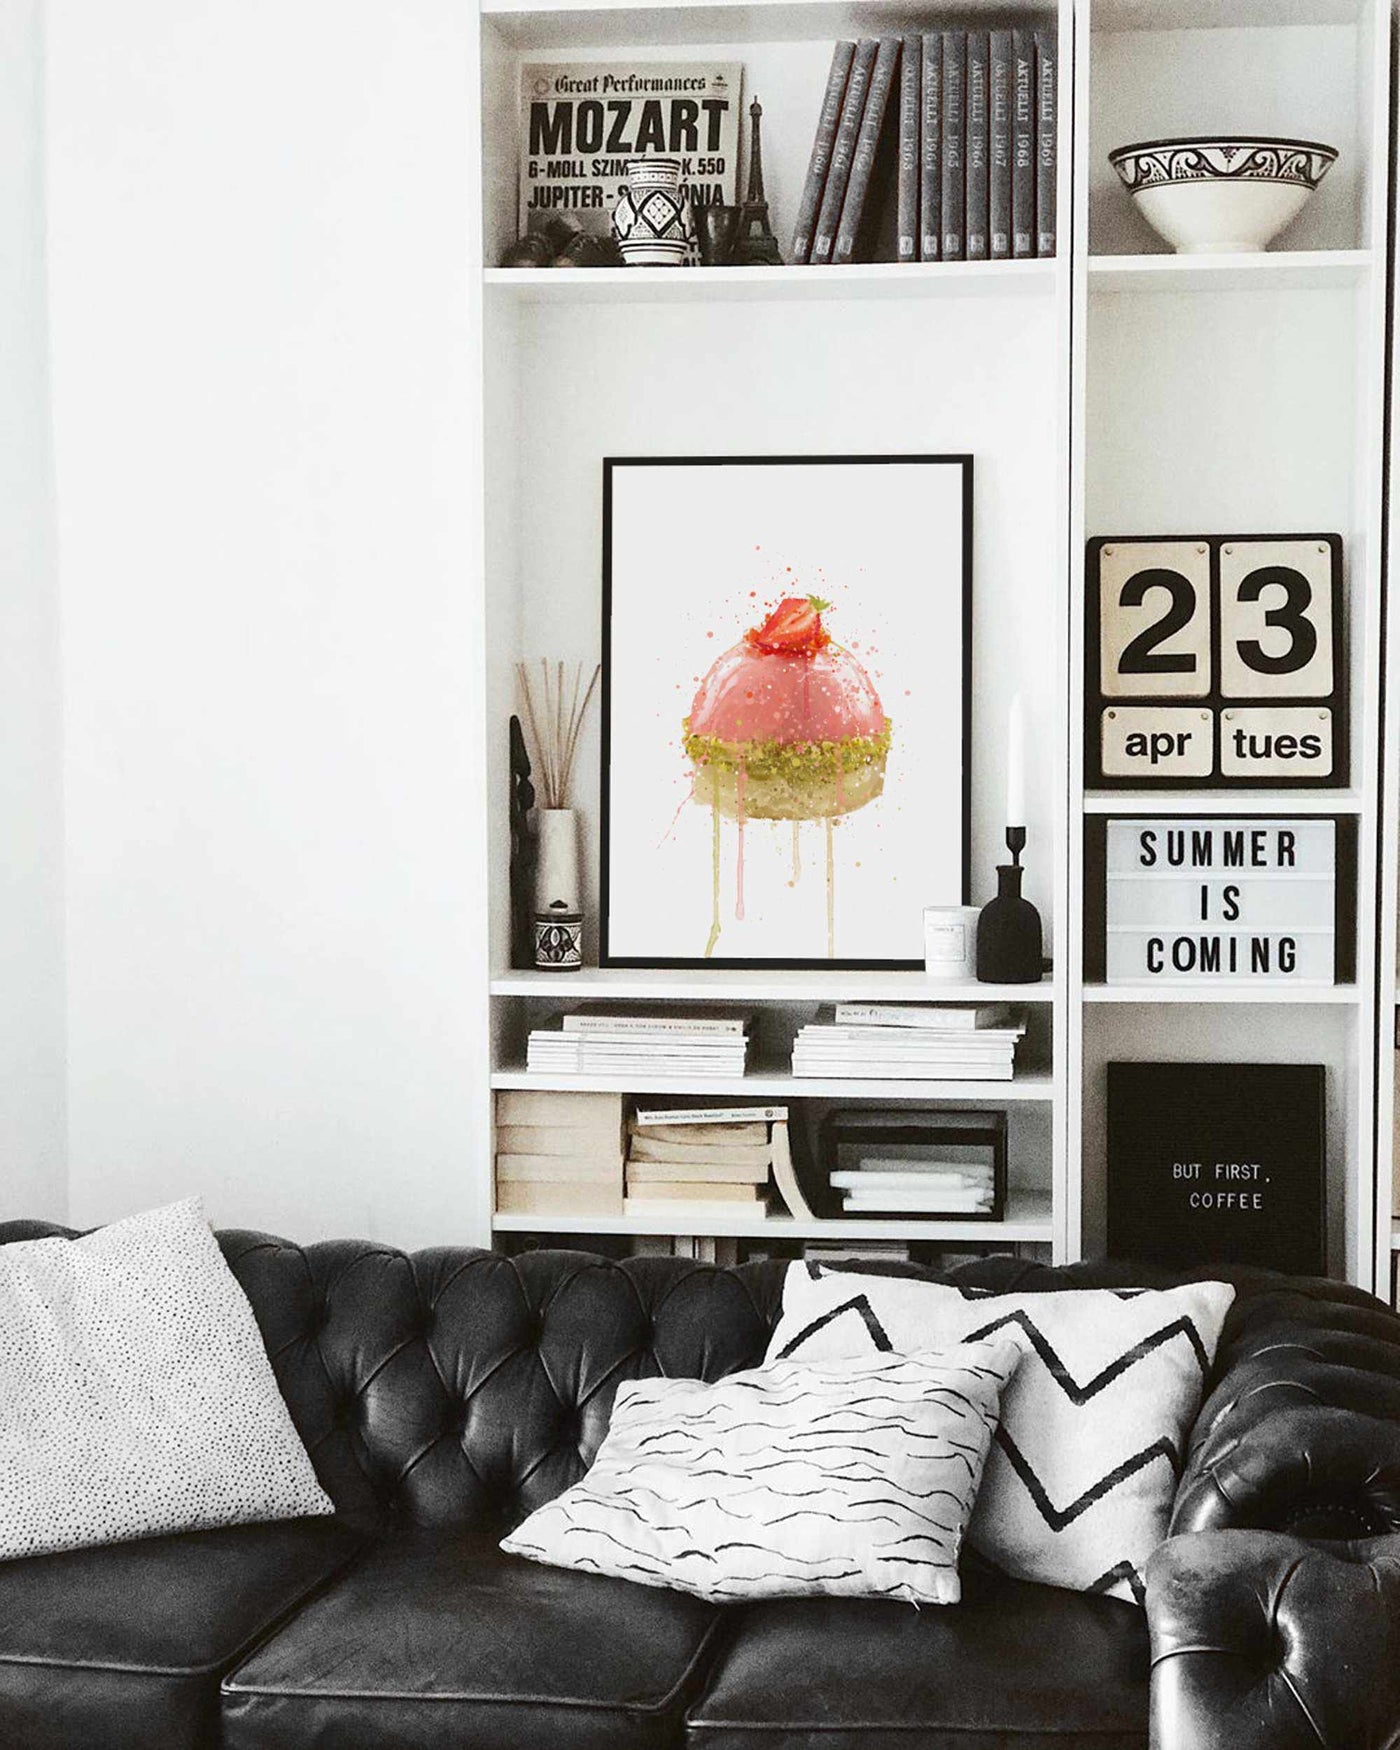 Patisserie Wall Art Print ‘Strawberry and Pistachio Dome’